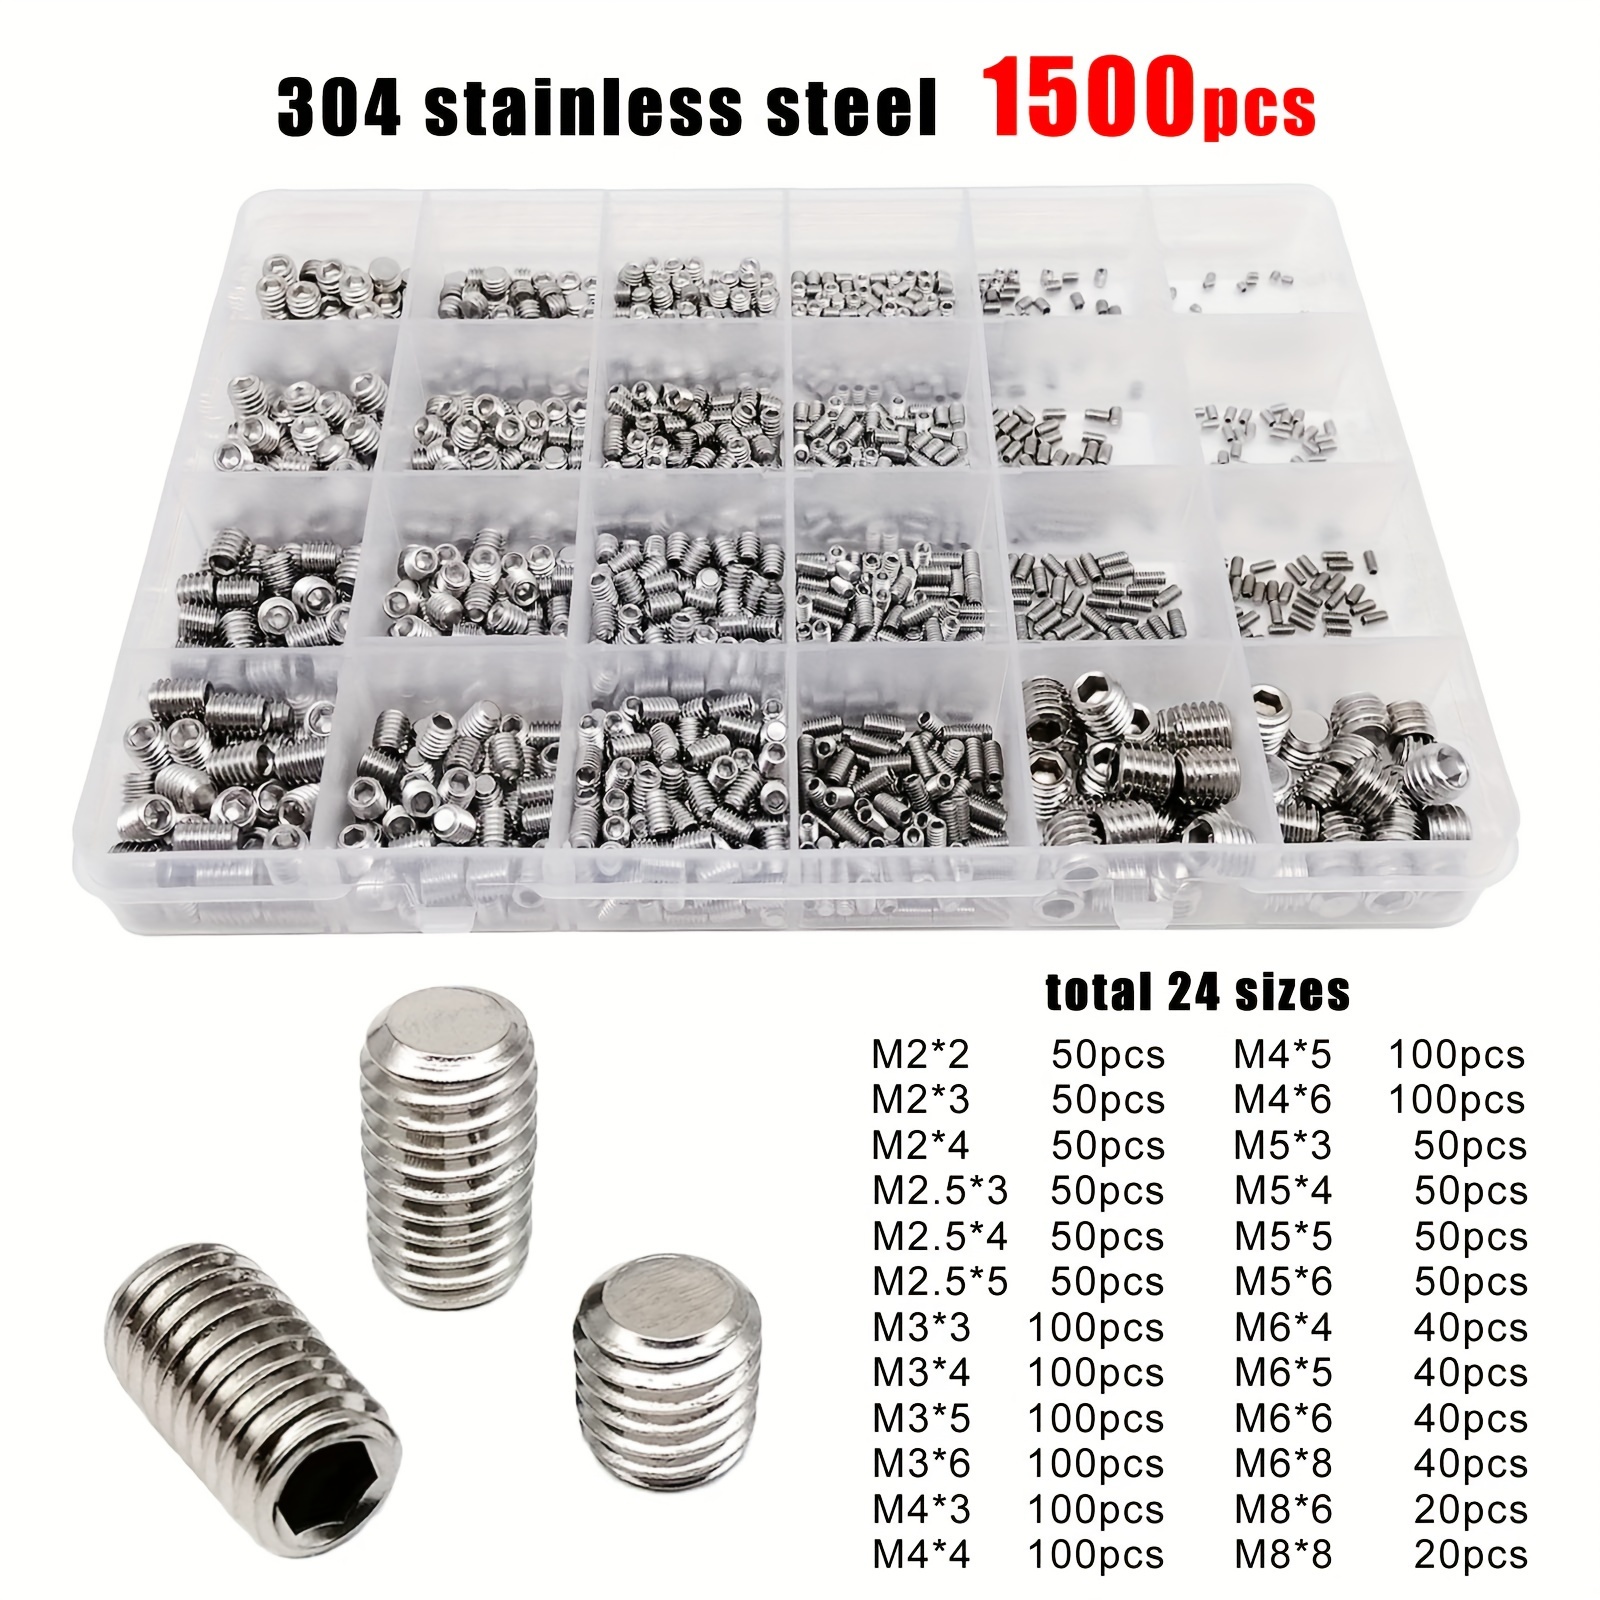 

500/1500pc Stainless Steel Hex Head Bolts & Socket Screws Set - M2 To M8, Full Thread, Corrosion Resistant For Metal Applications - Black